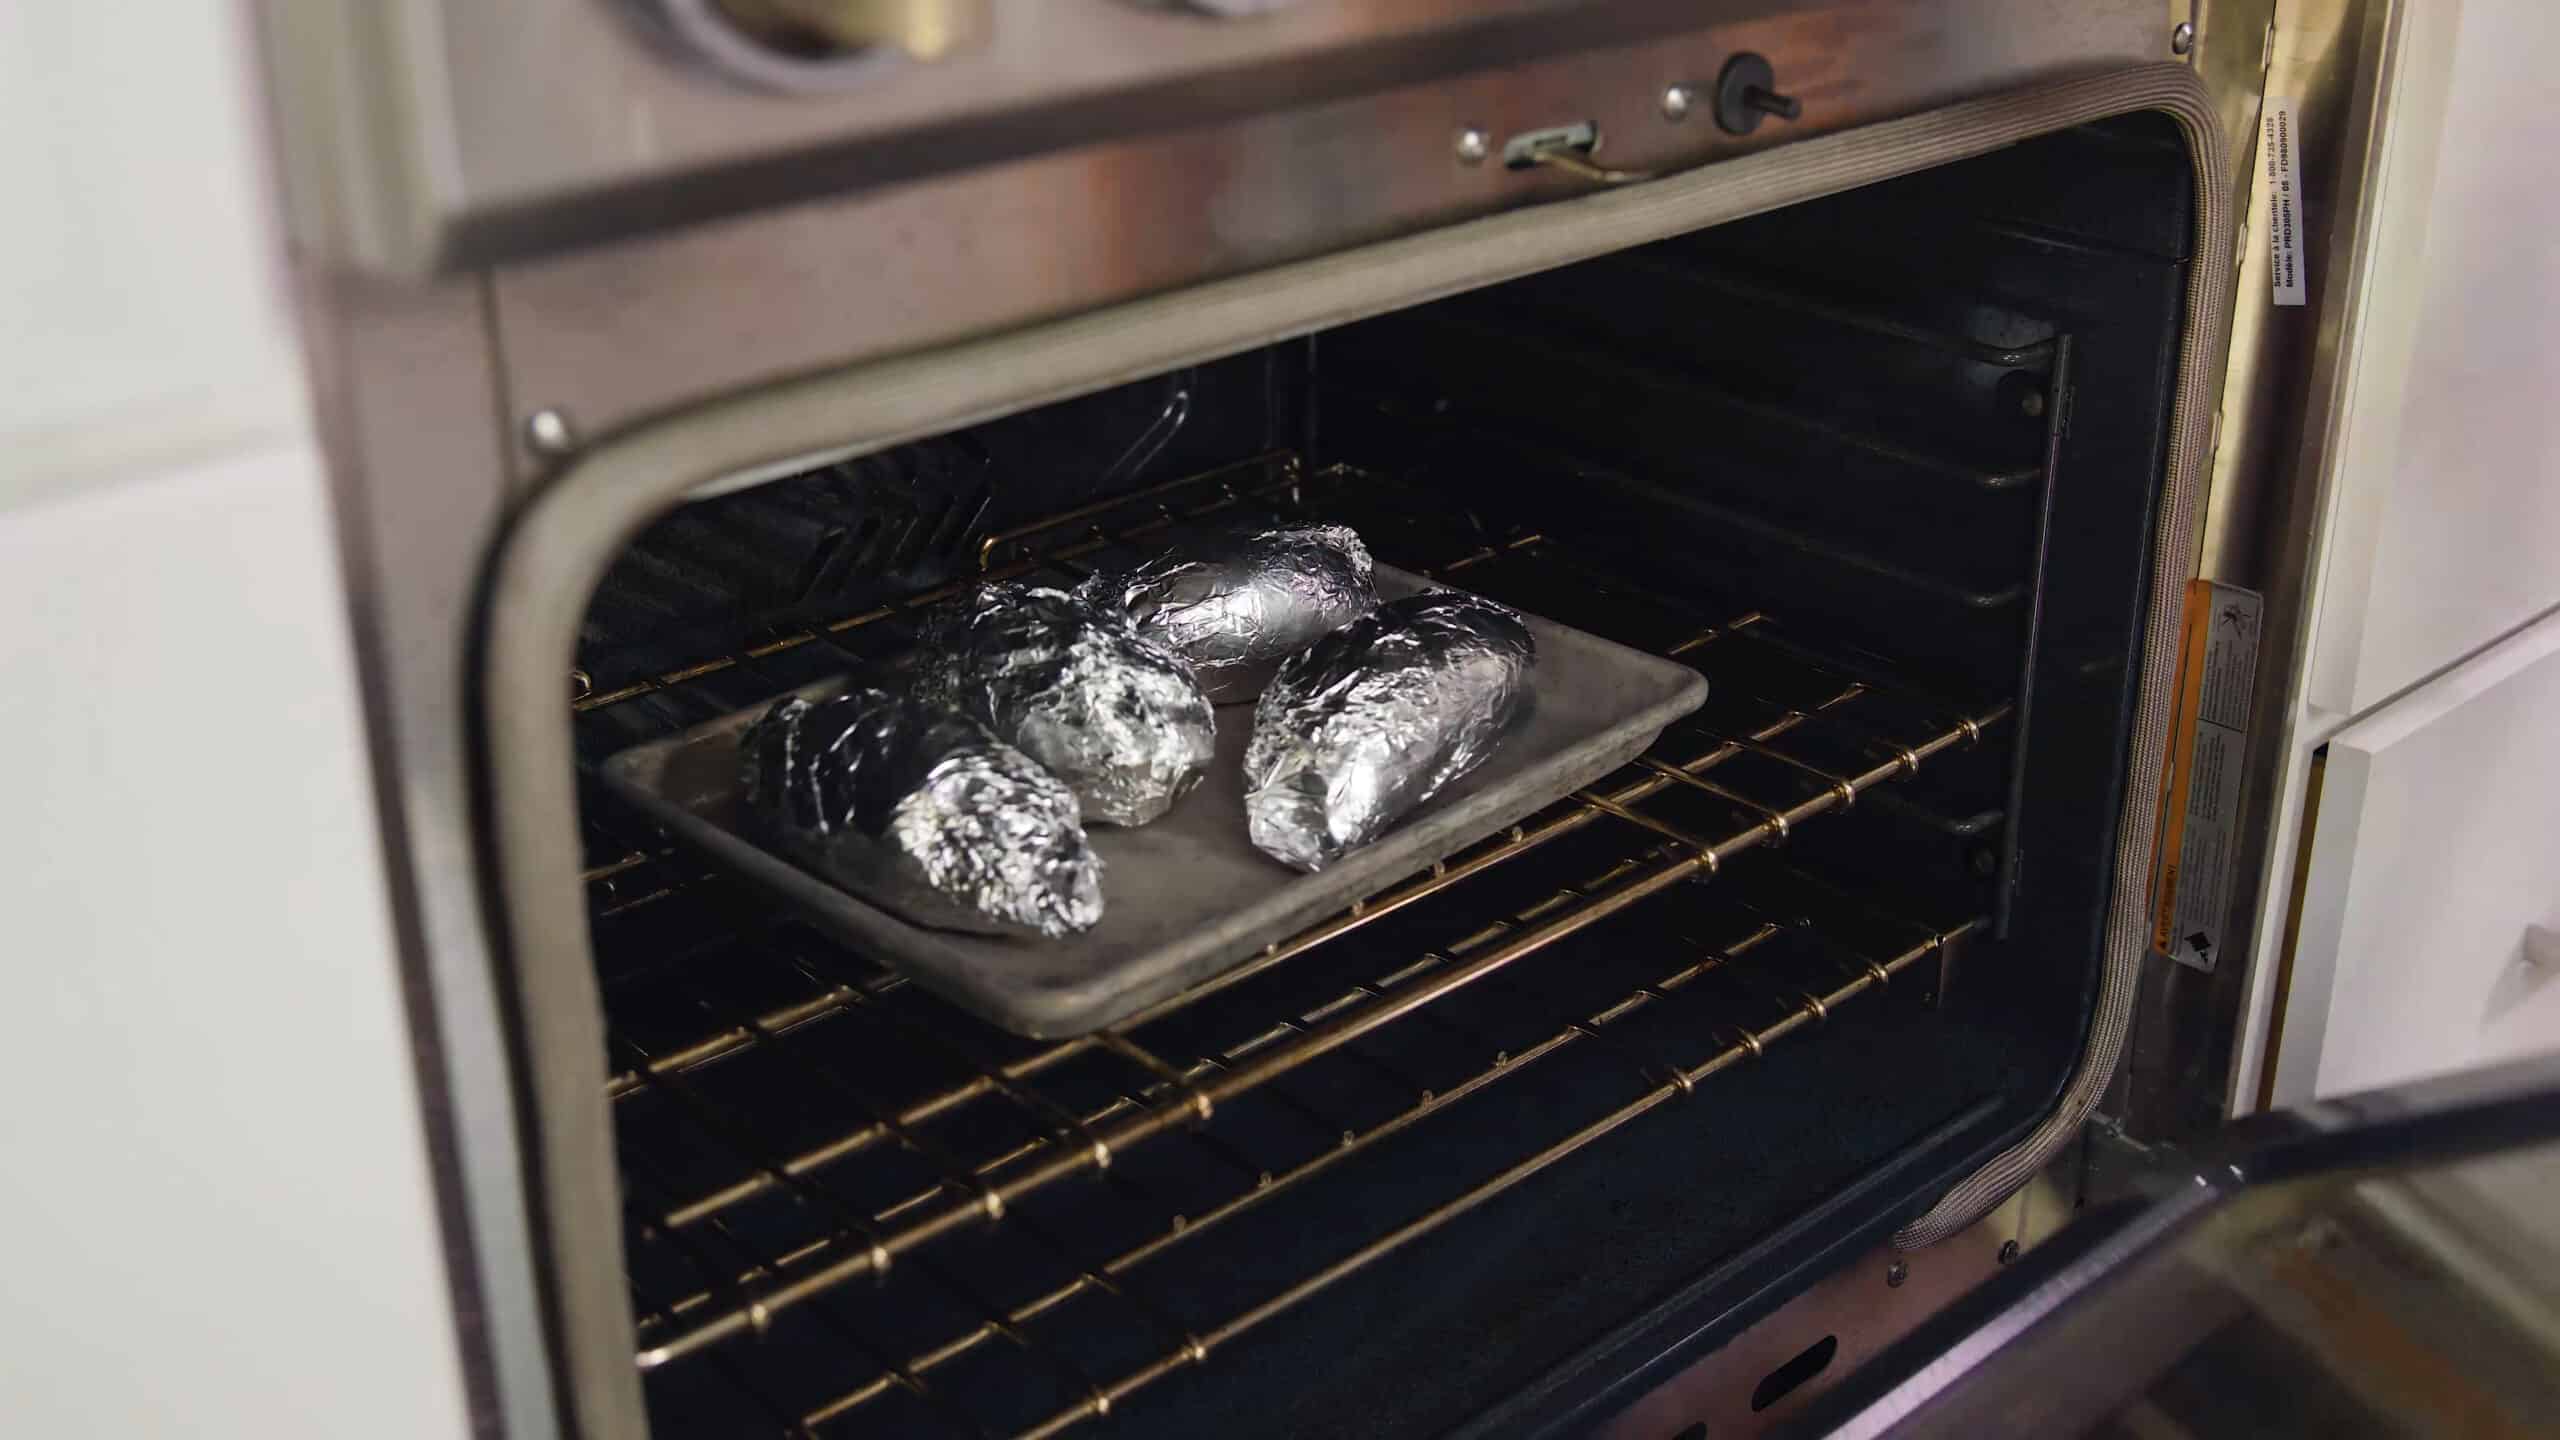 Angled view of four sweet potatoes wrapped in aluminum foil, placed on a baking sheet and put into an open oven.